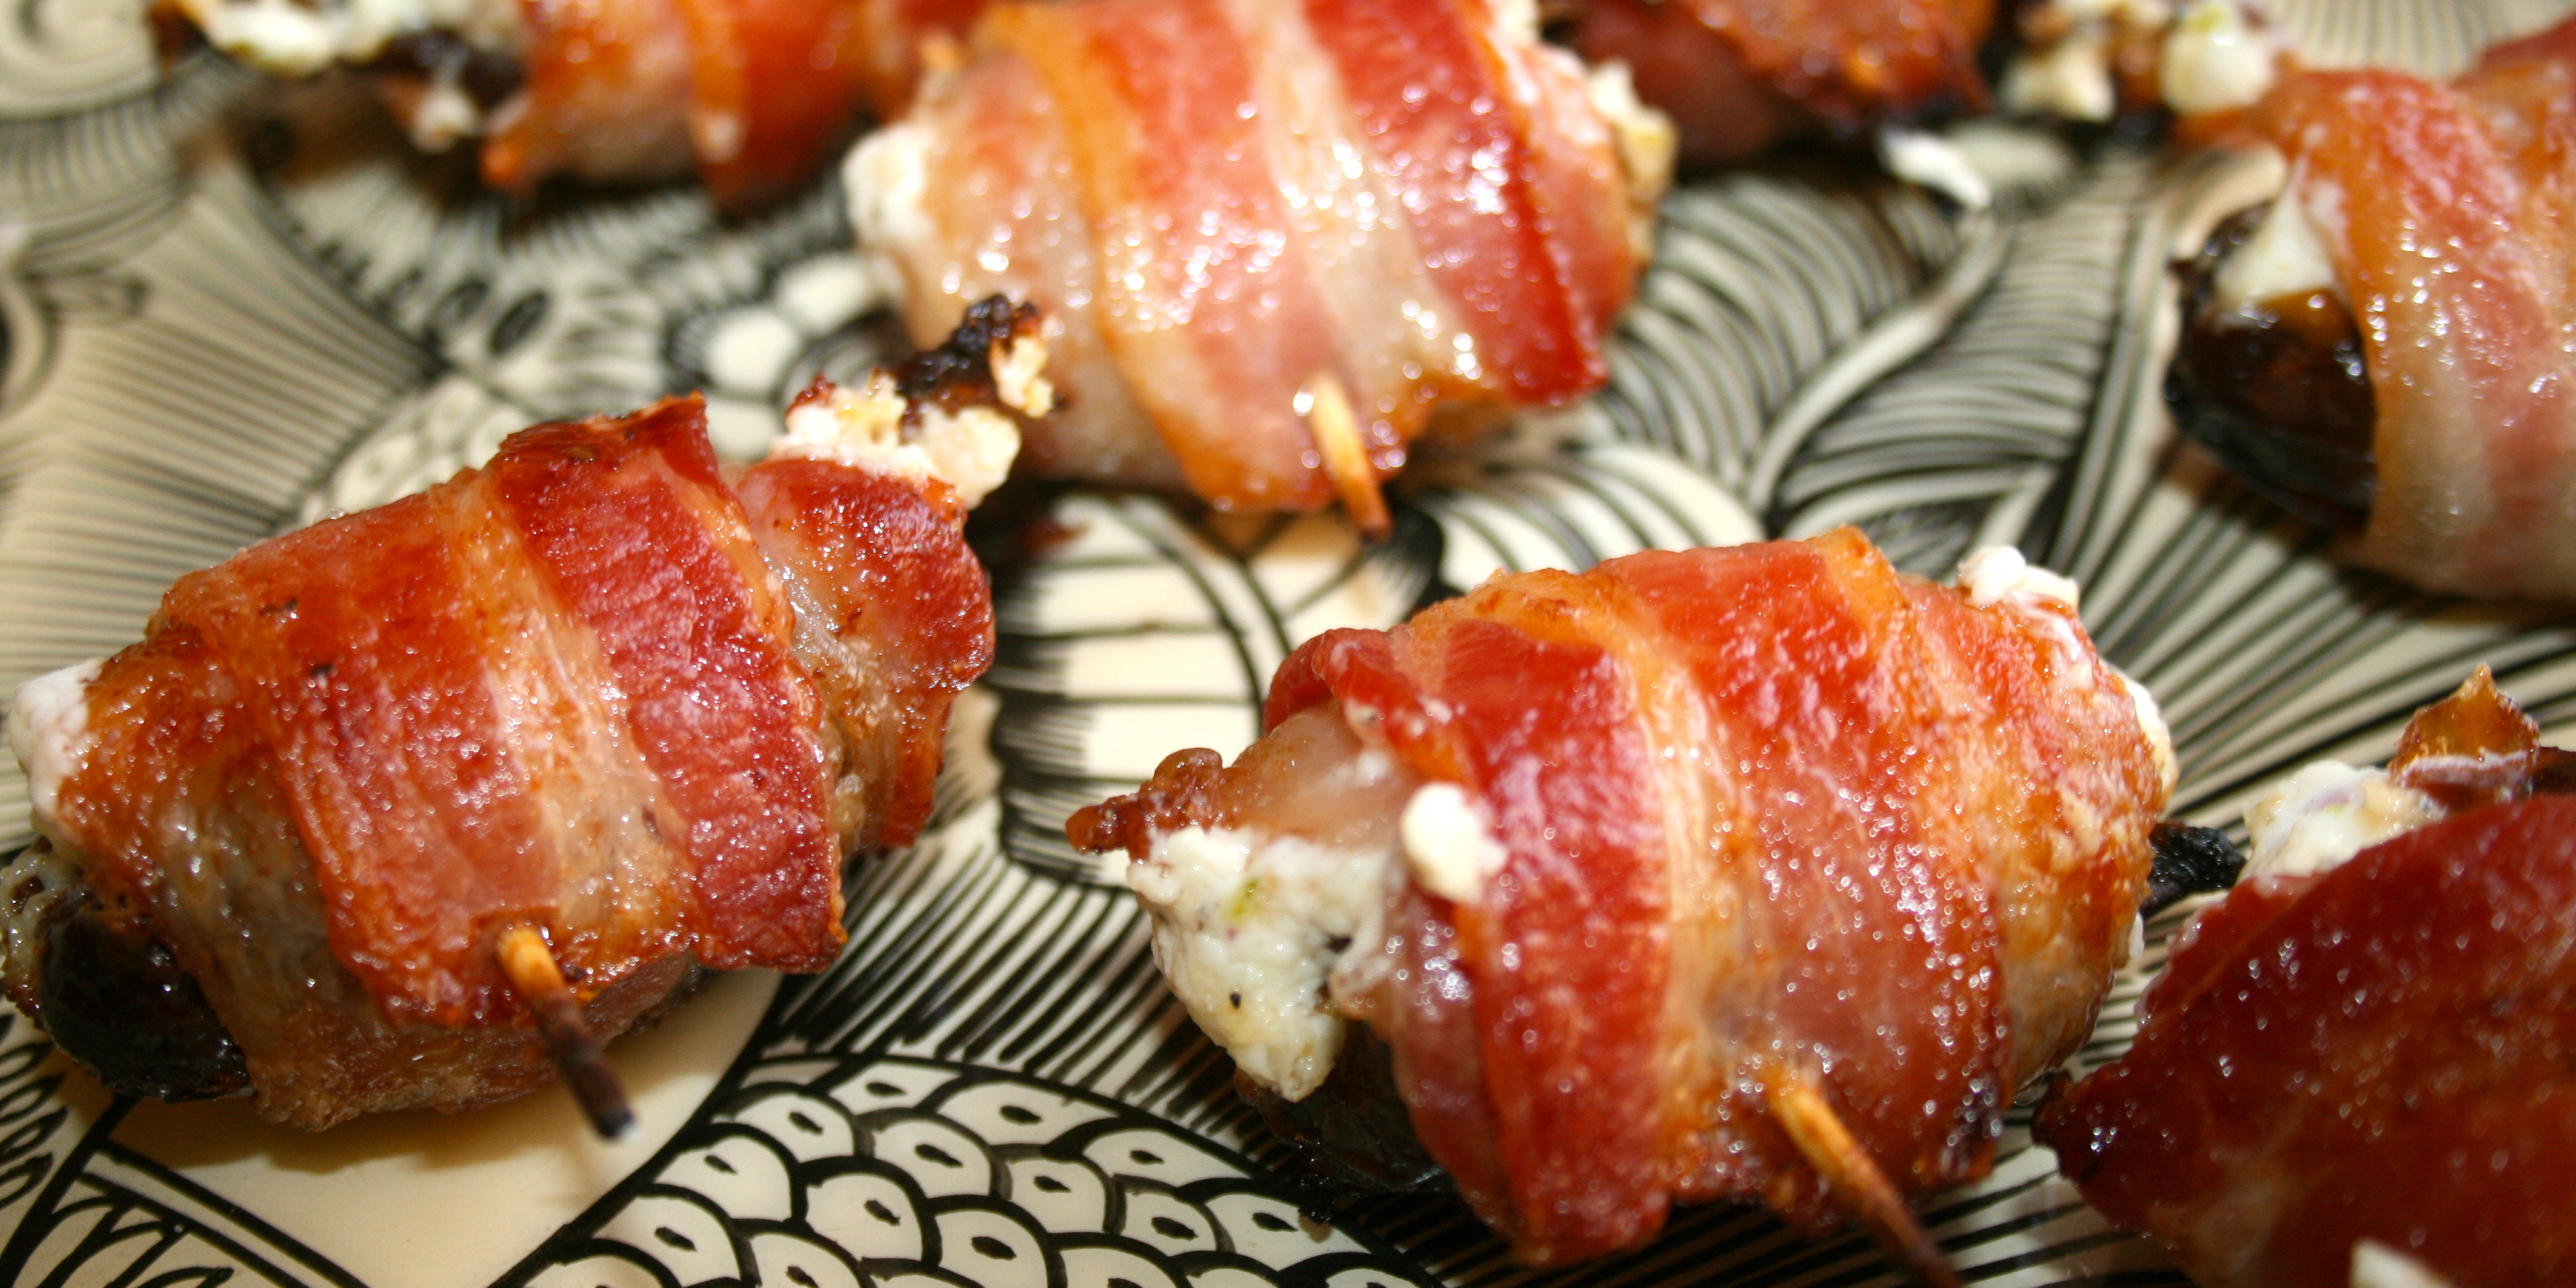 A date for the Latina Cook-Off. Special ingredients: Pistachios and Bacon. PISTACHIO CHEESE FILLED DATES WRAPPED IN BACON!